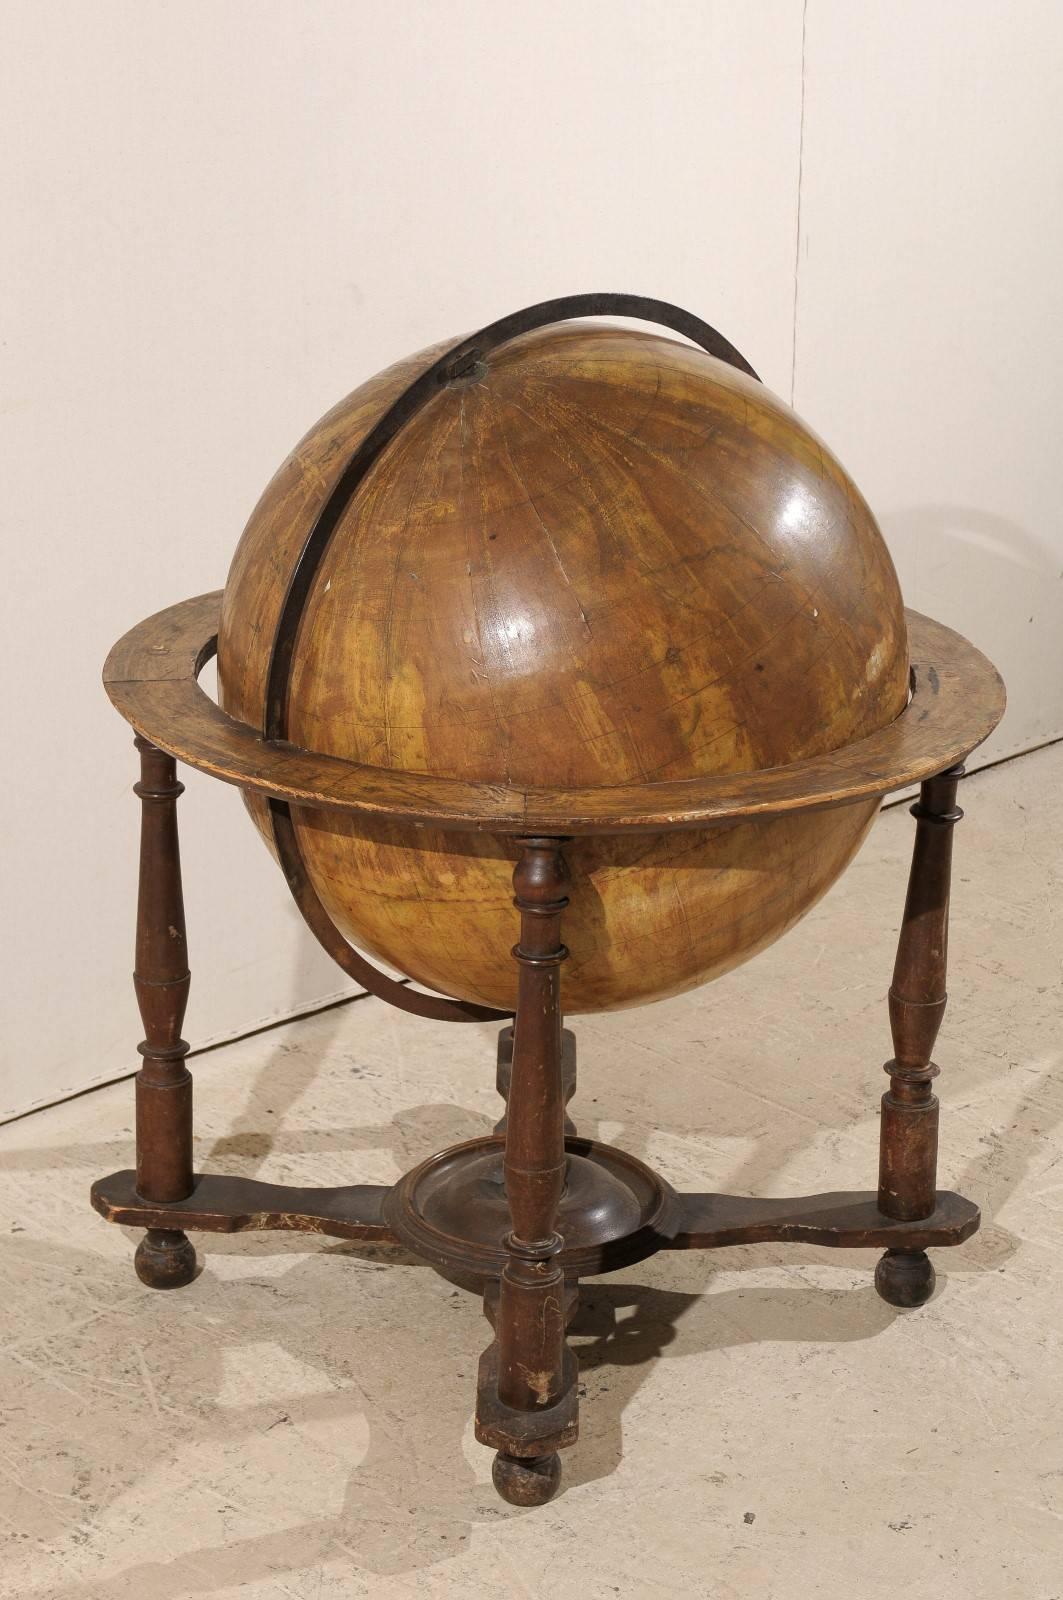 globe on wooden stand